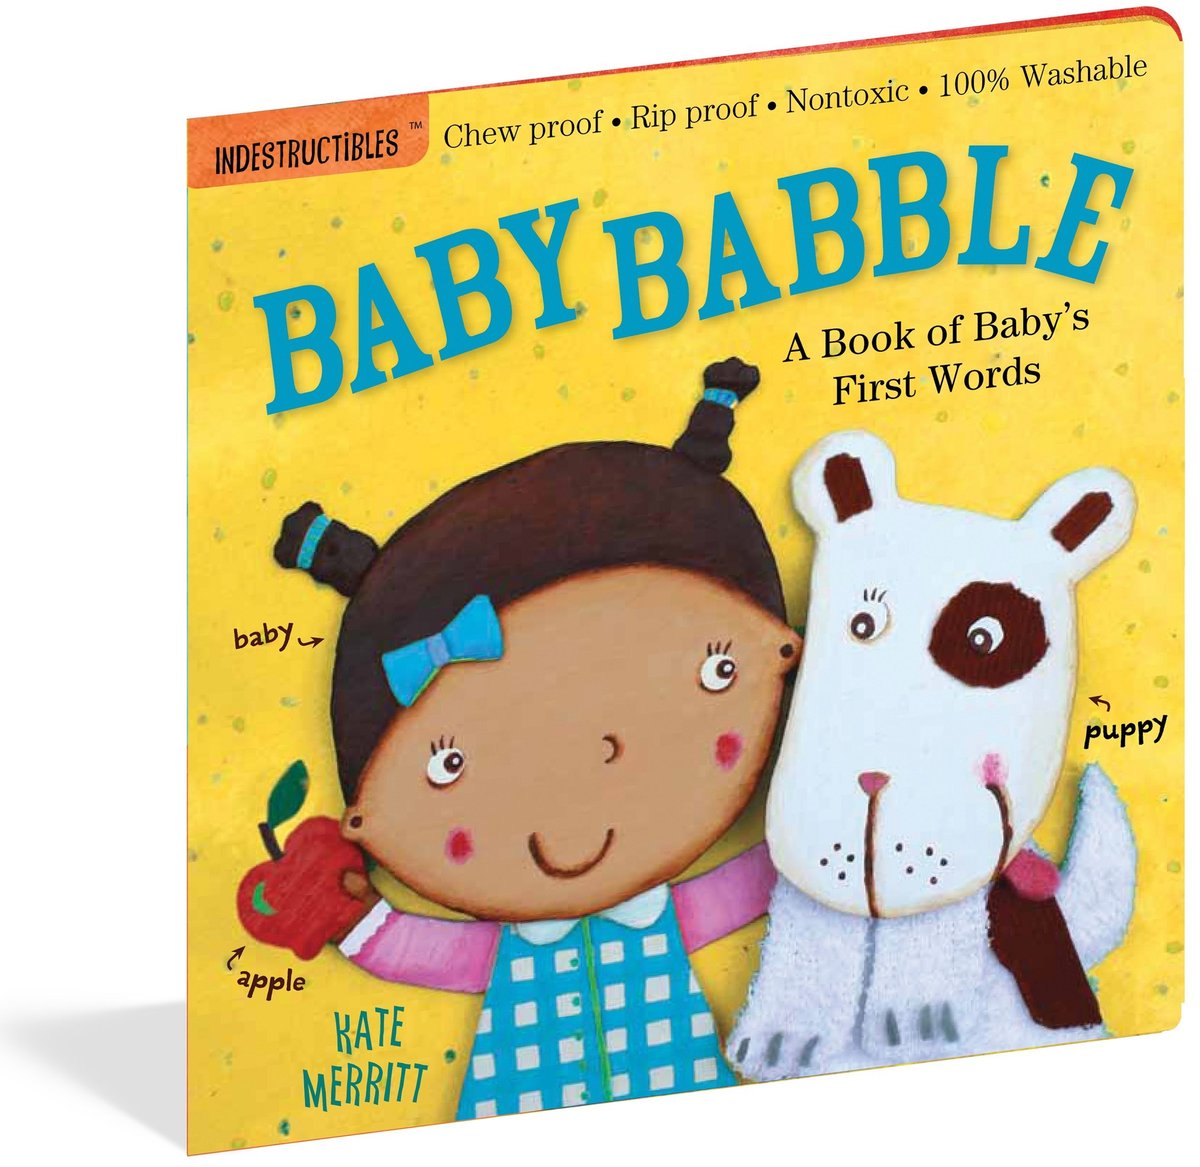 Baby Babble - Indestructibles Book